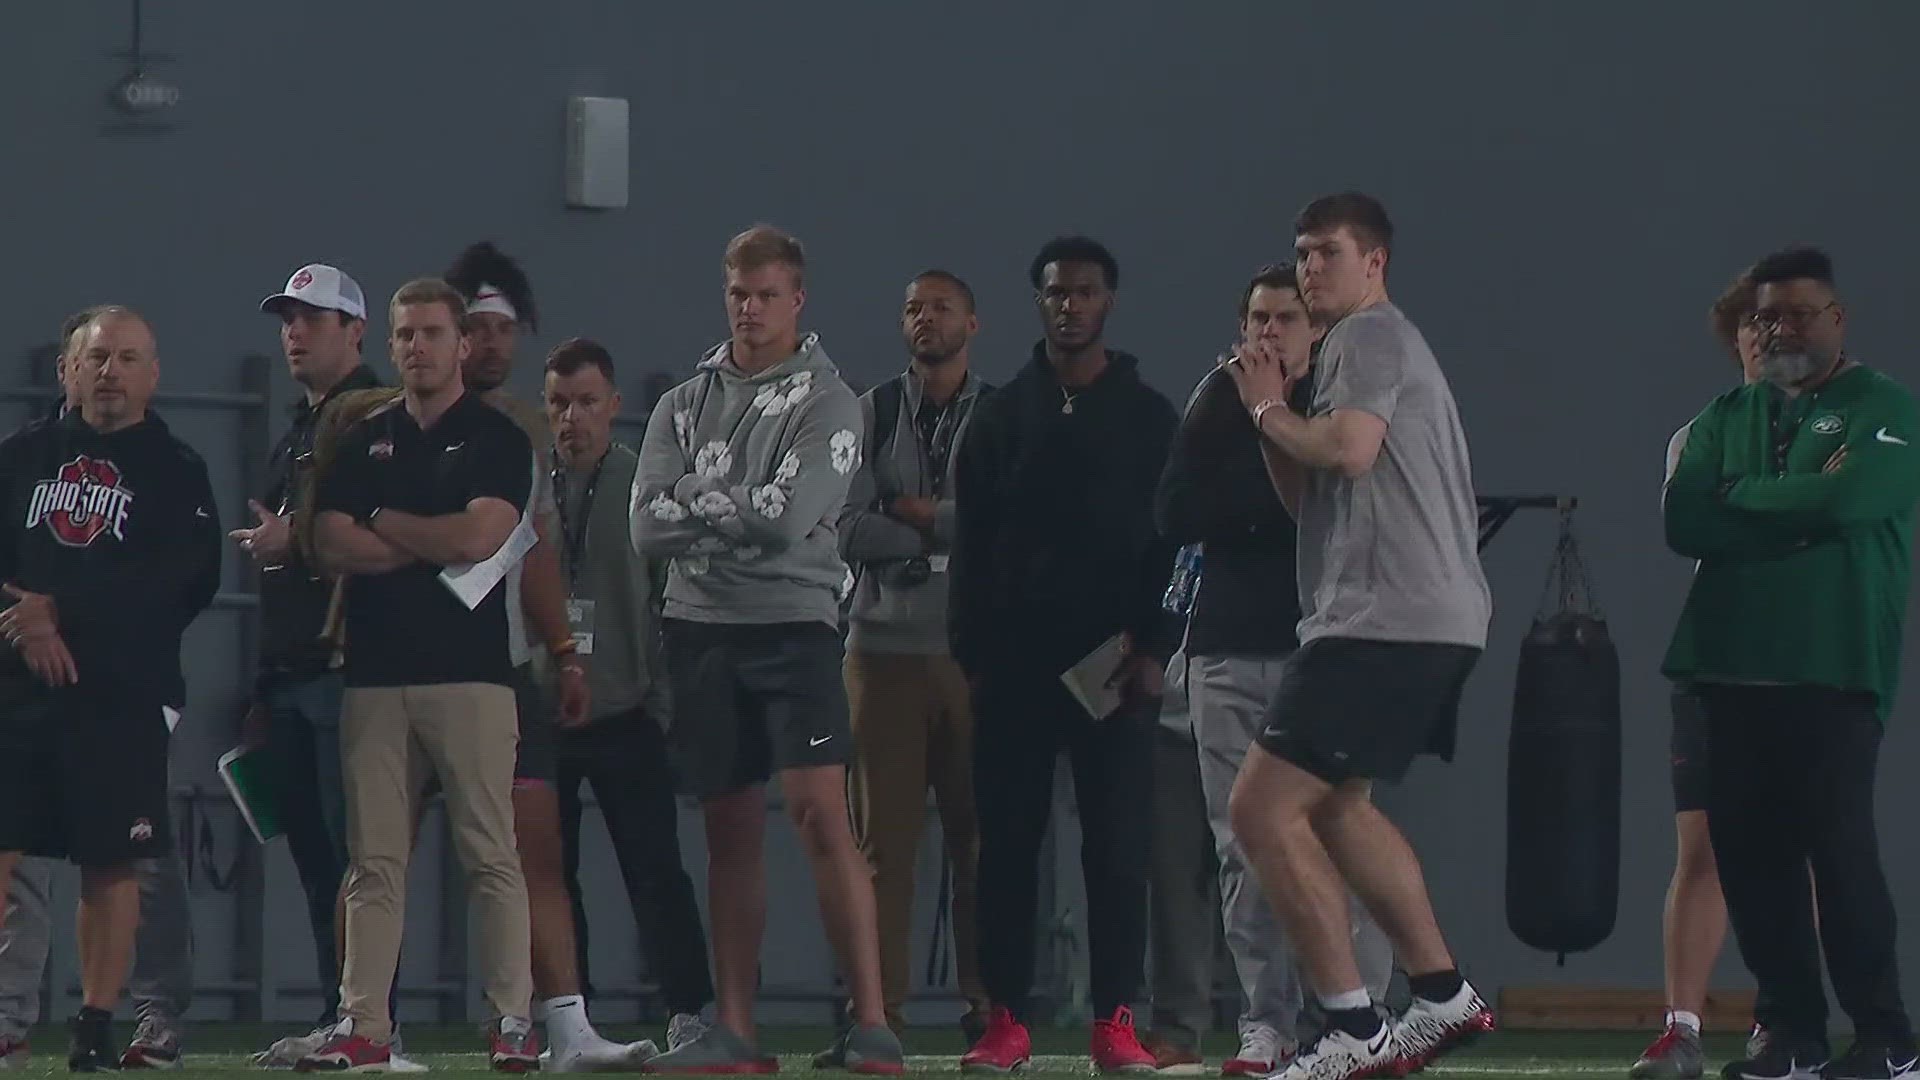 Ohio State football players who have entered the NFL Draft had the chance to show their skills ahead of the draft on April 25.